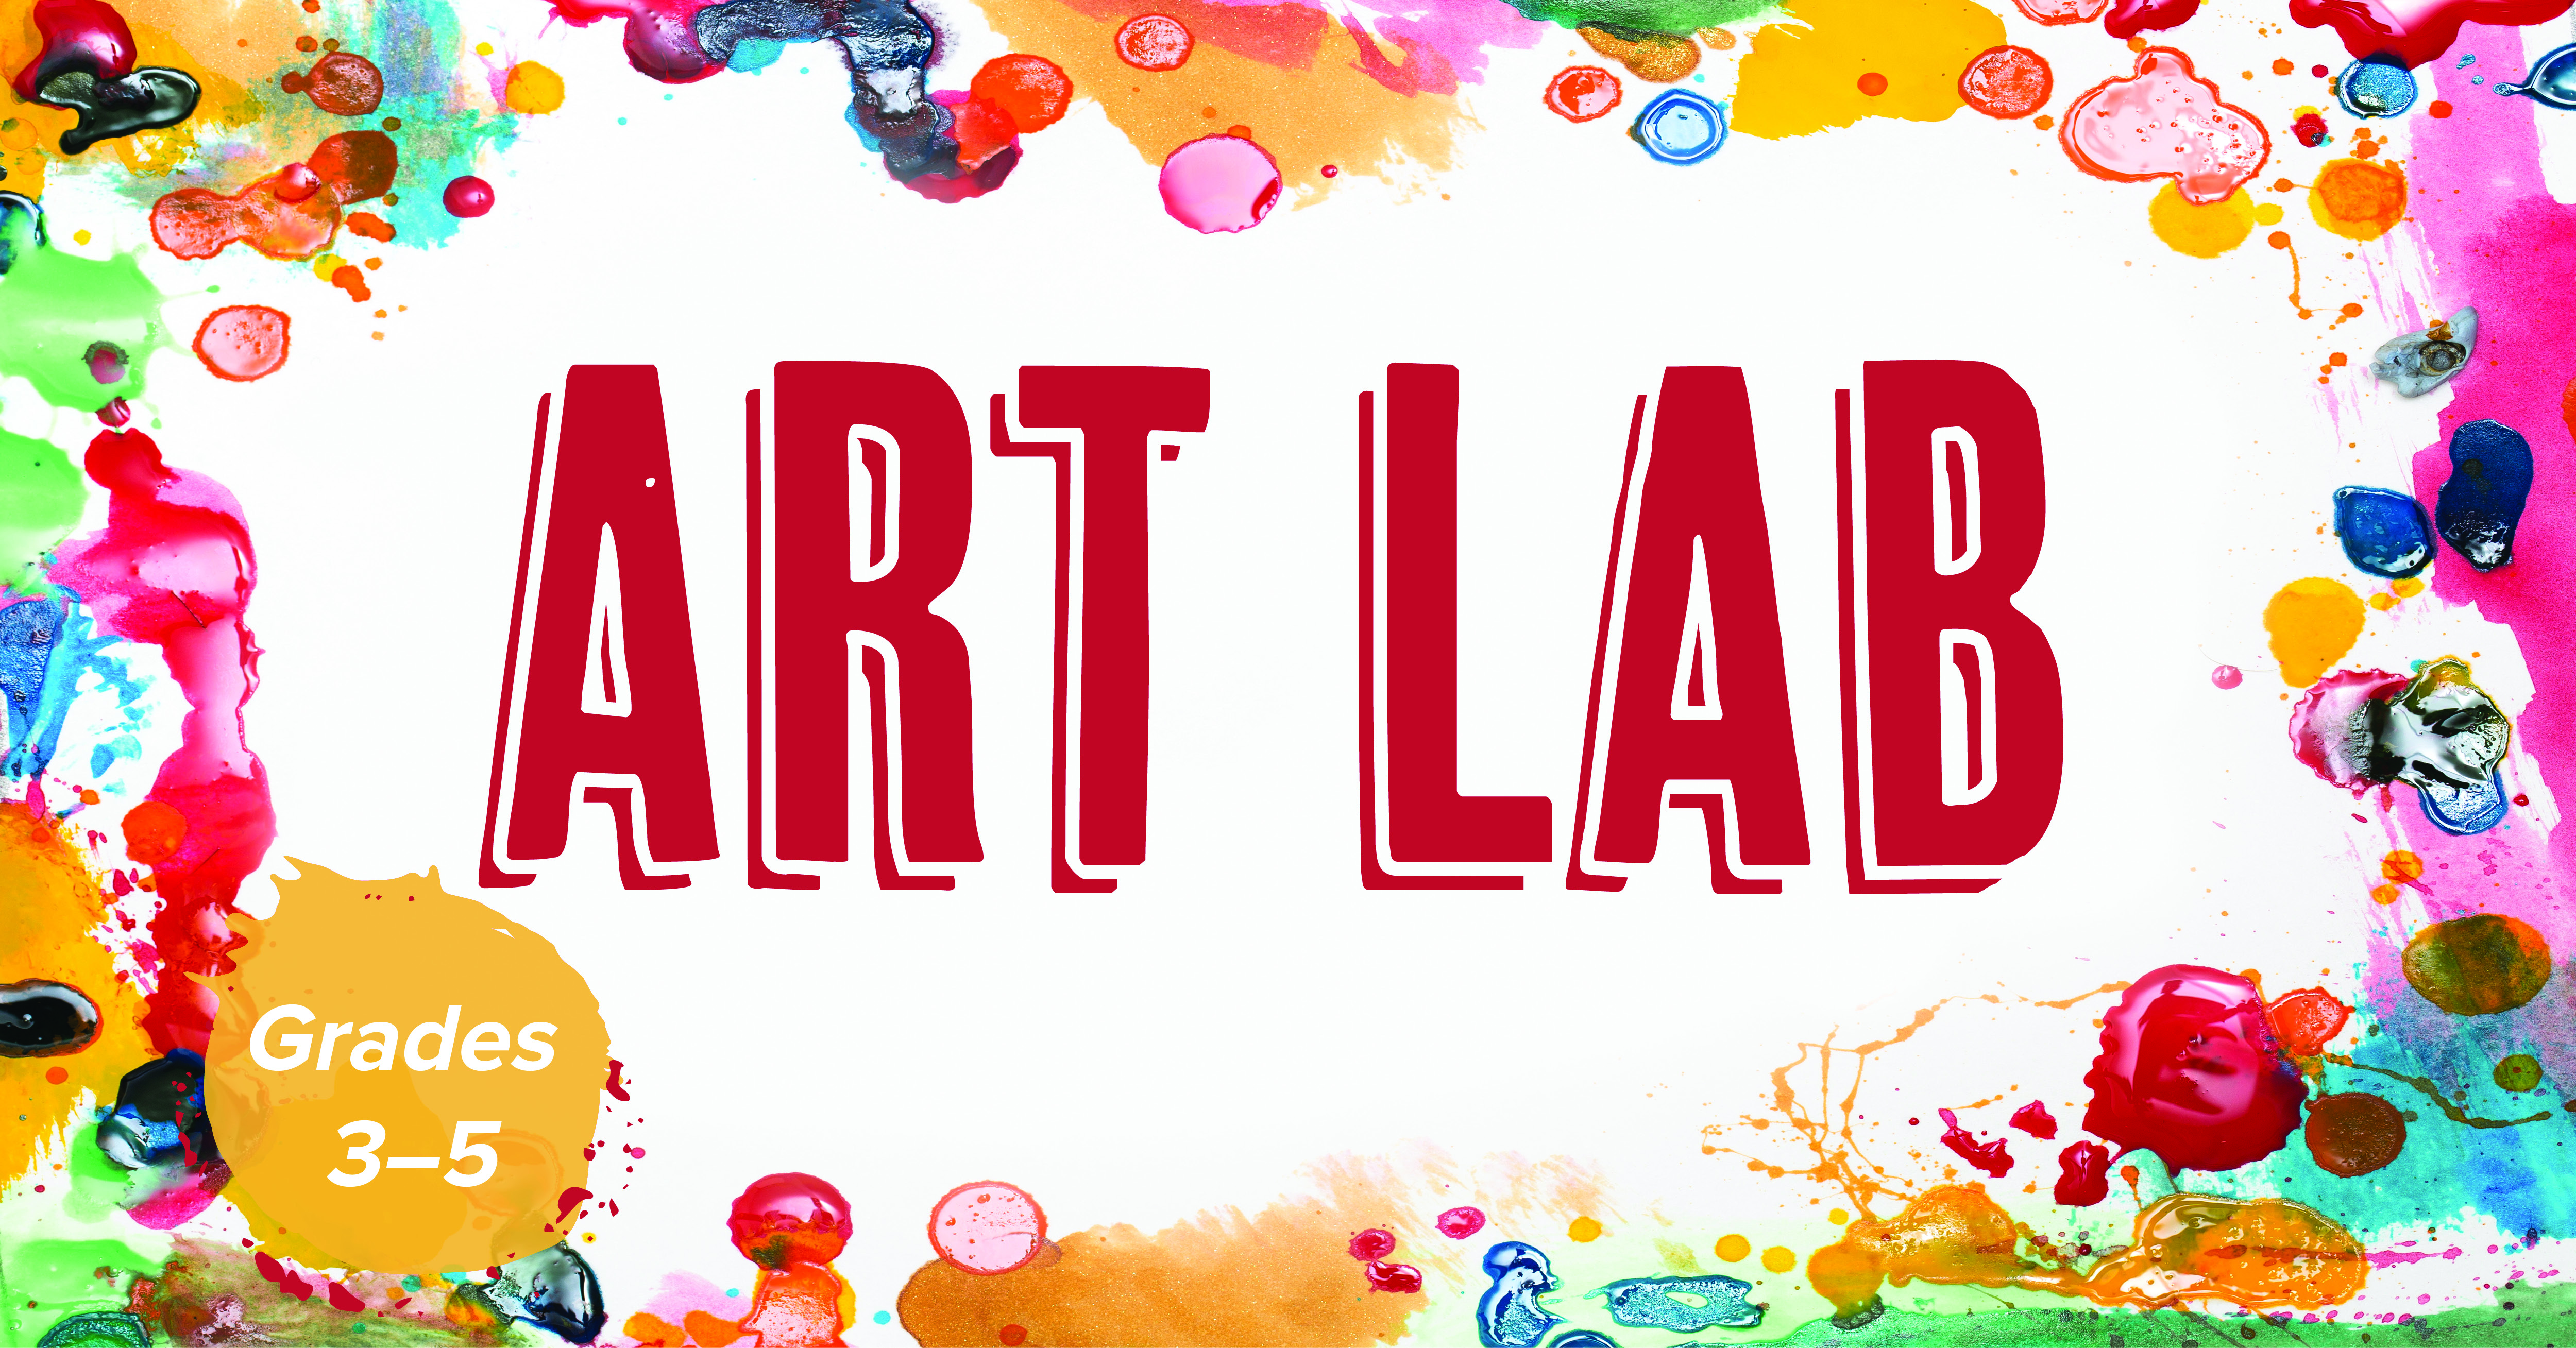 "art lab" written in red over a white background bordered by orange, pink, and green splatters. "Grades 3-5" in white text over an orange dot in lower left corner